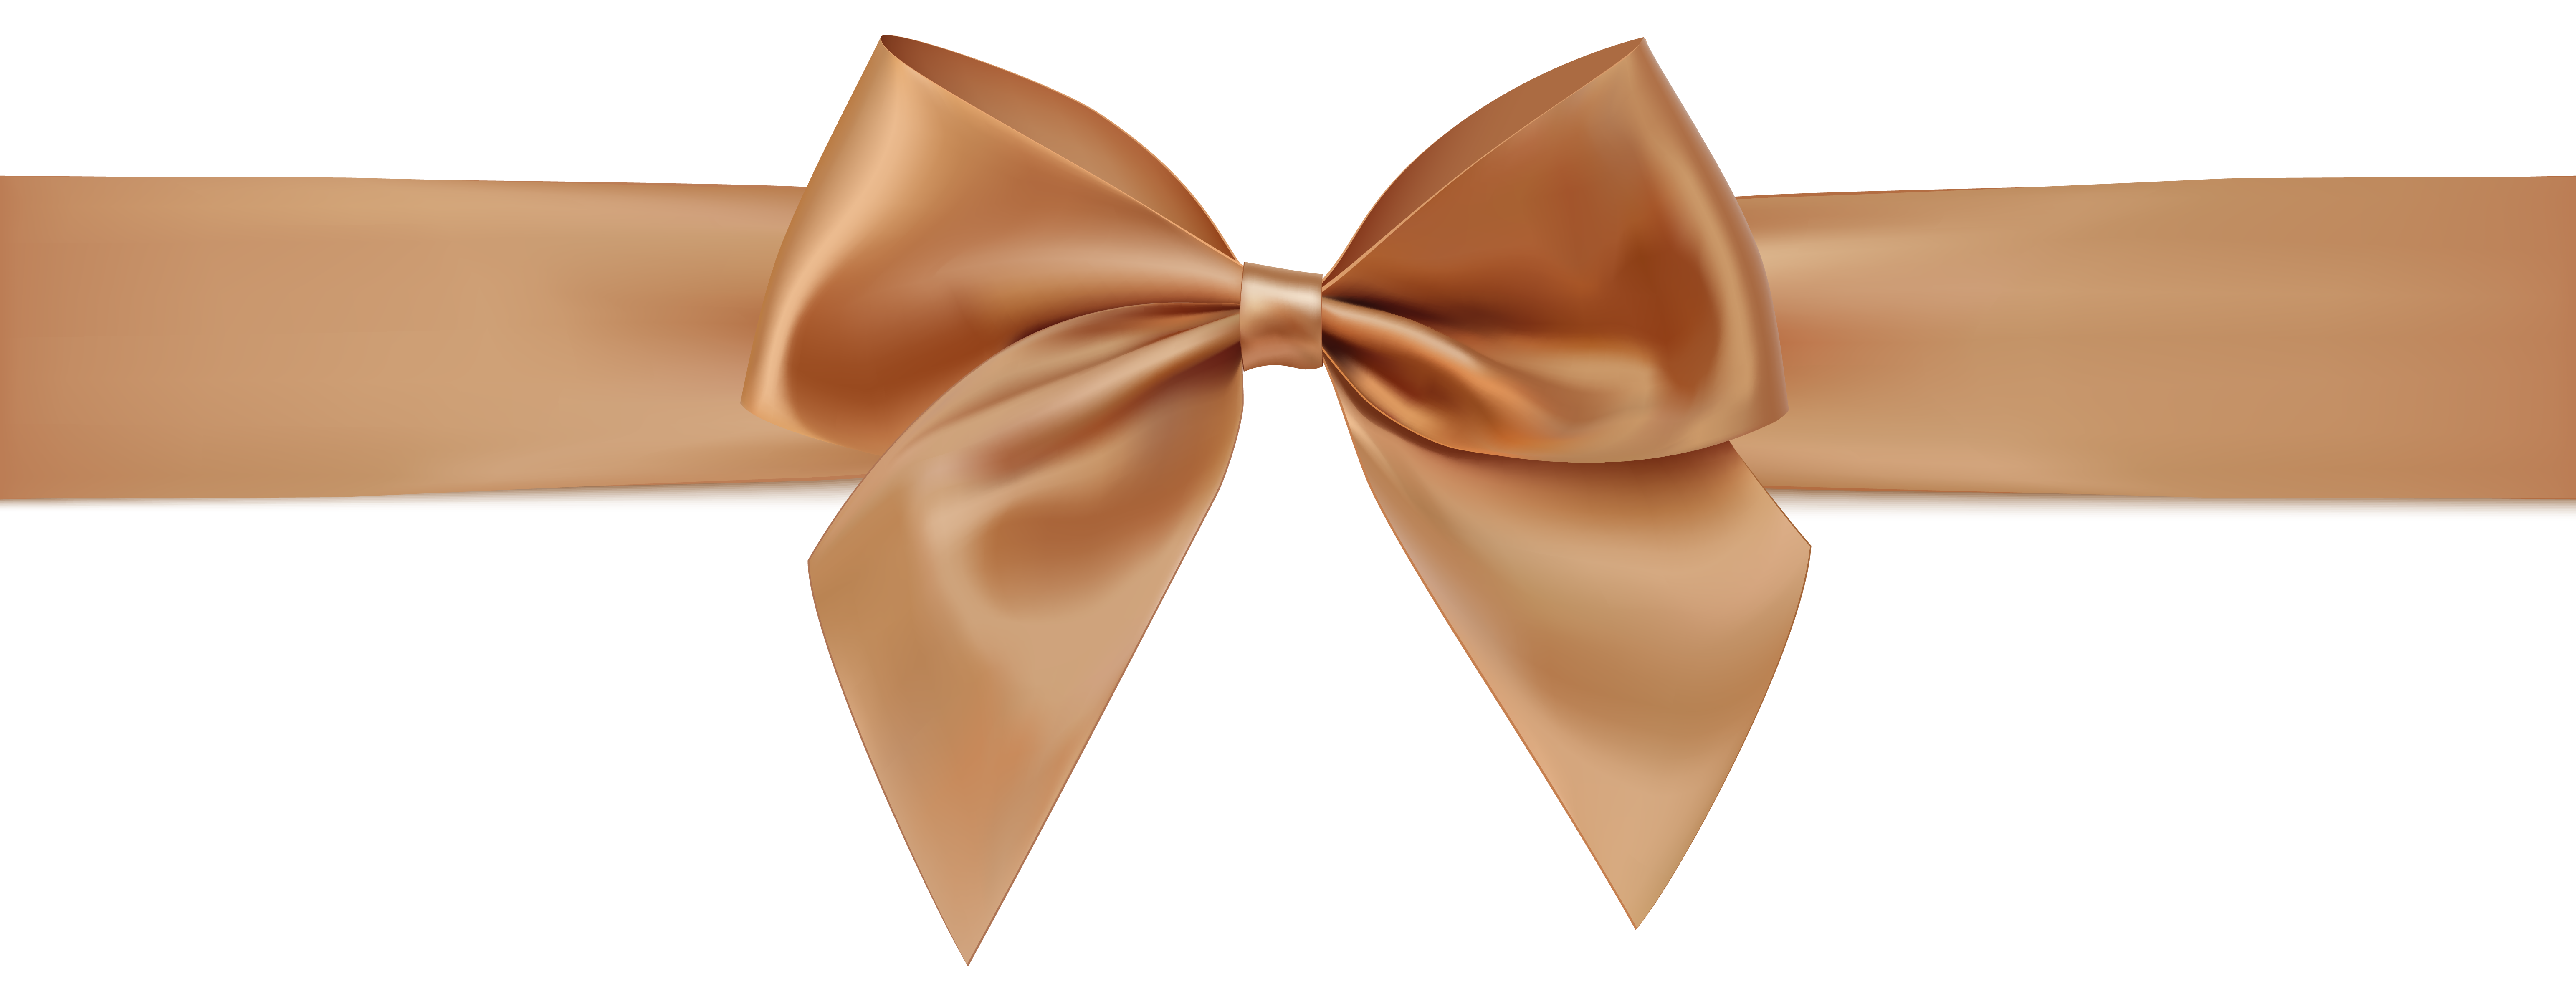 Brown Ribbon PNG Clipart - Best WEB Clipart